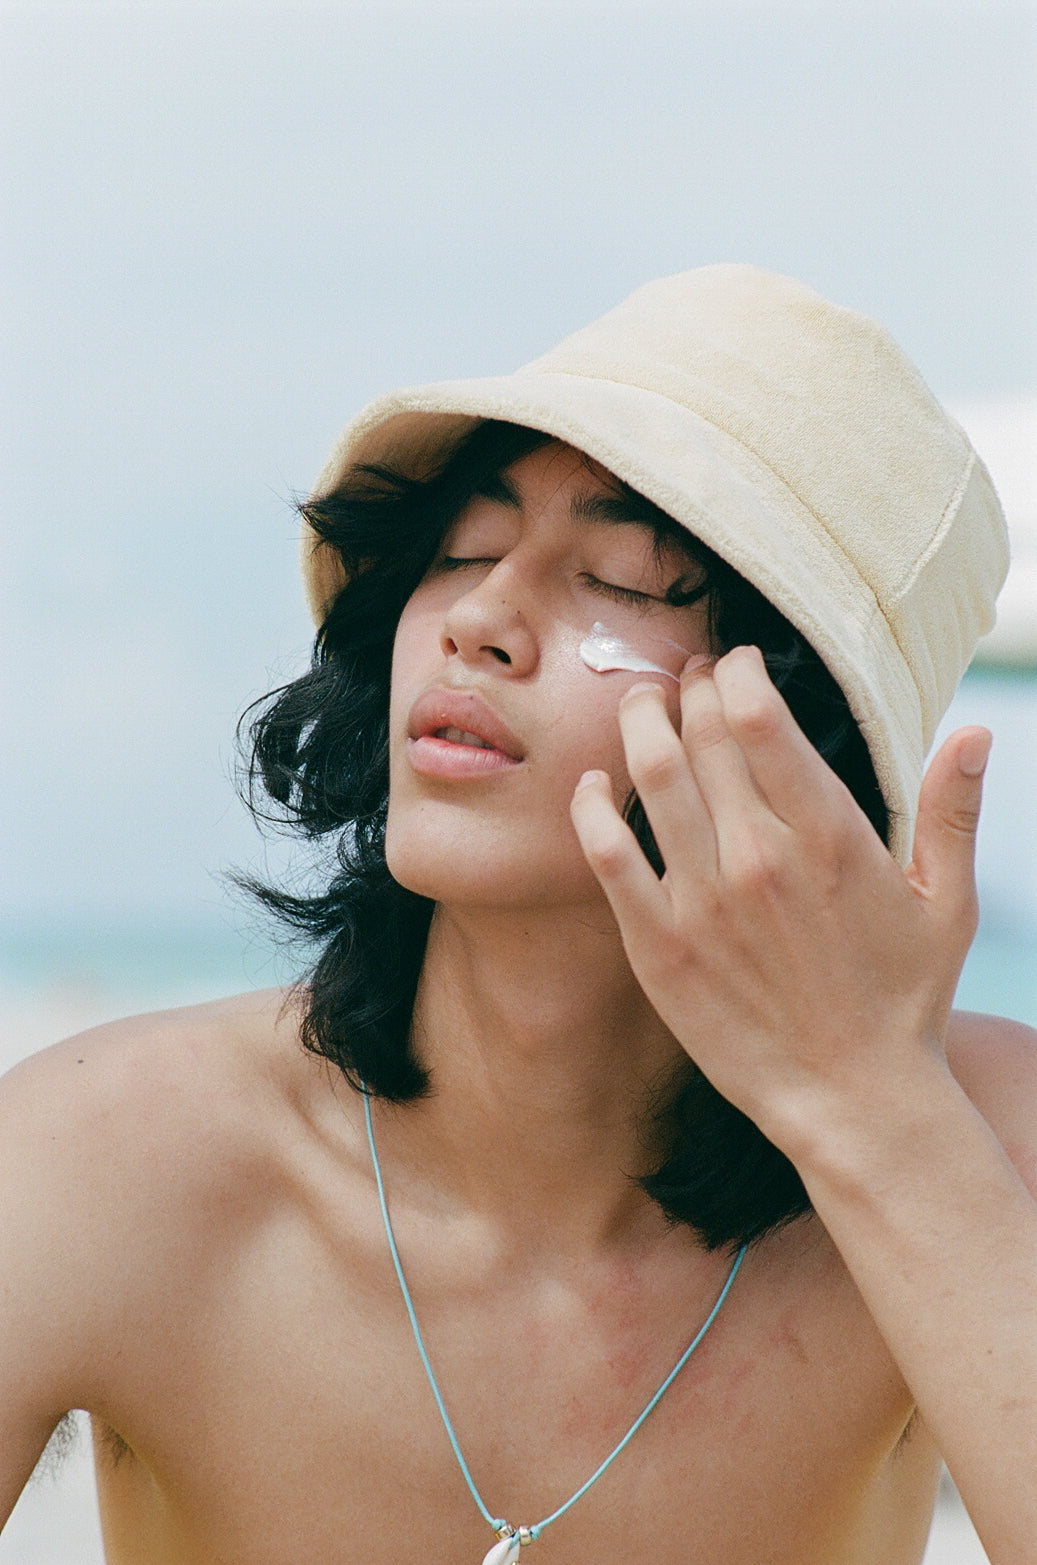 Sunscreen Before Or After Moisturizer? Should You Apply Sunscreen Before Or After Moisturizer?